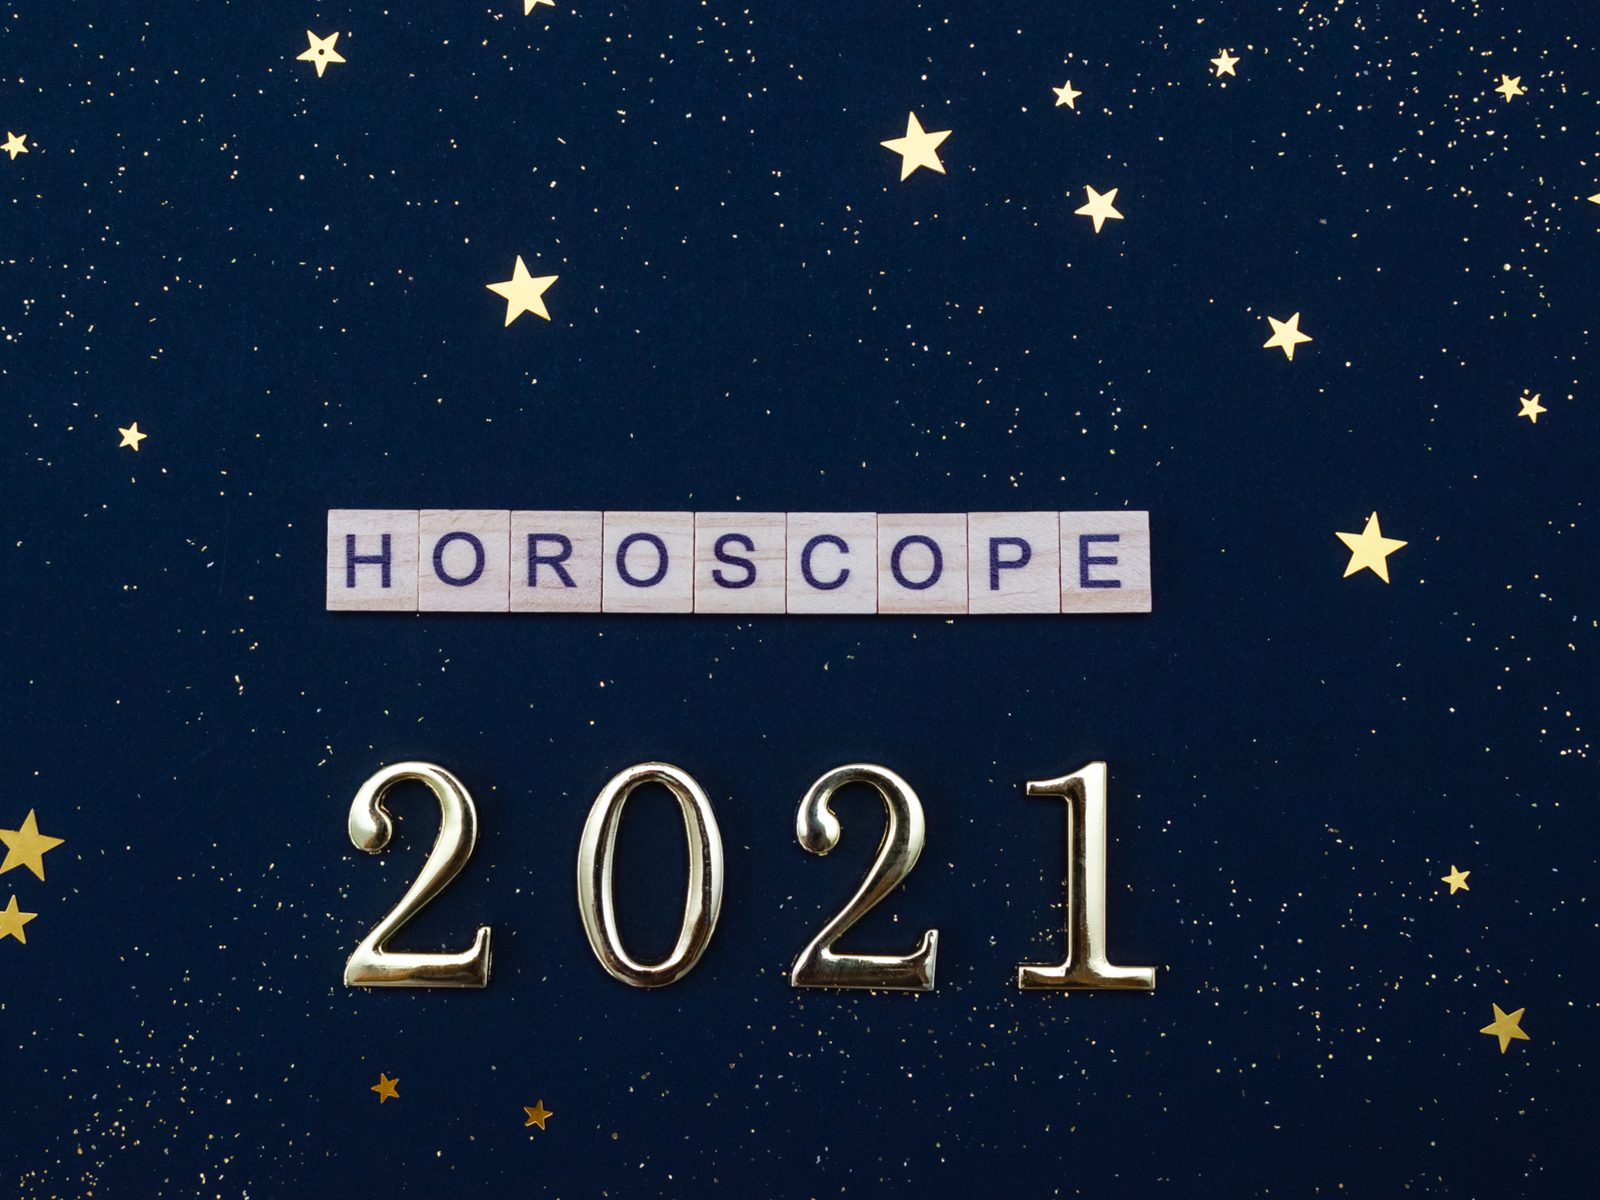 Horoscope Today August 12 21 Check Out Daily Astrological Prediction For Cancer Leo Virgo Libra Scorpio And Other Zodiac Signs